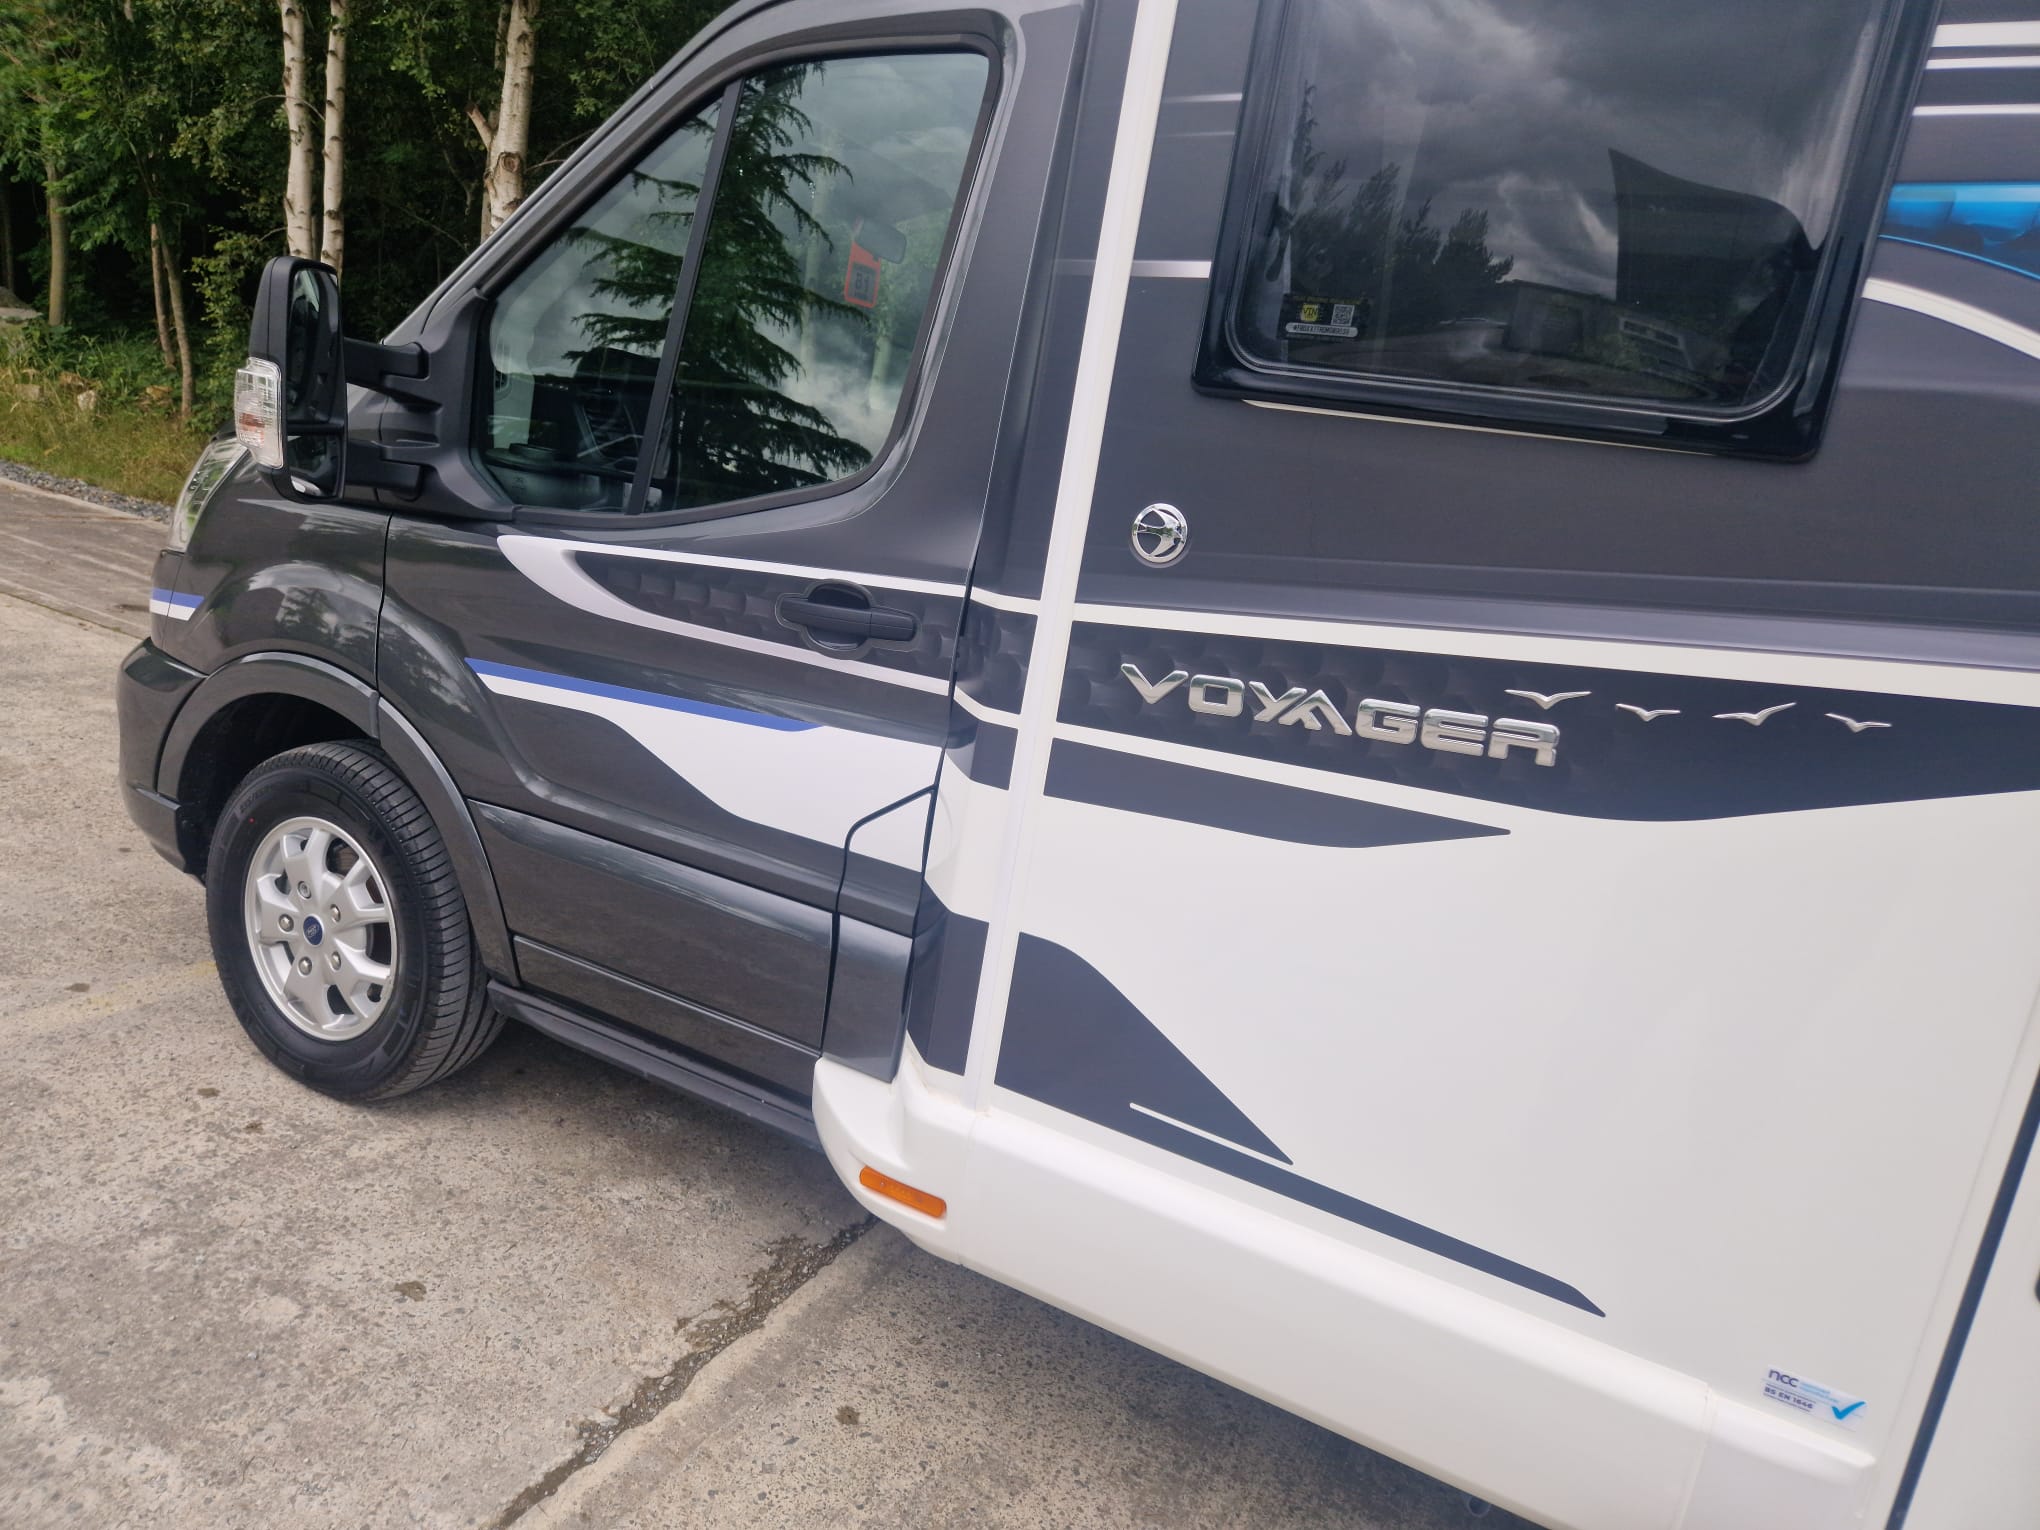 New Swift Voyager 564 - Automatic